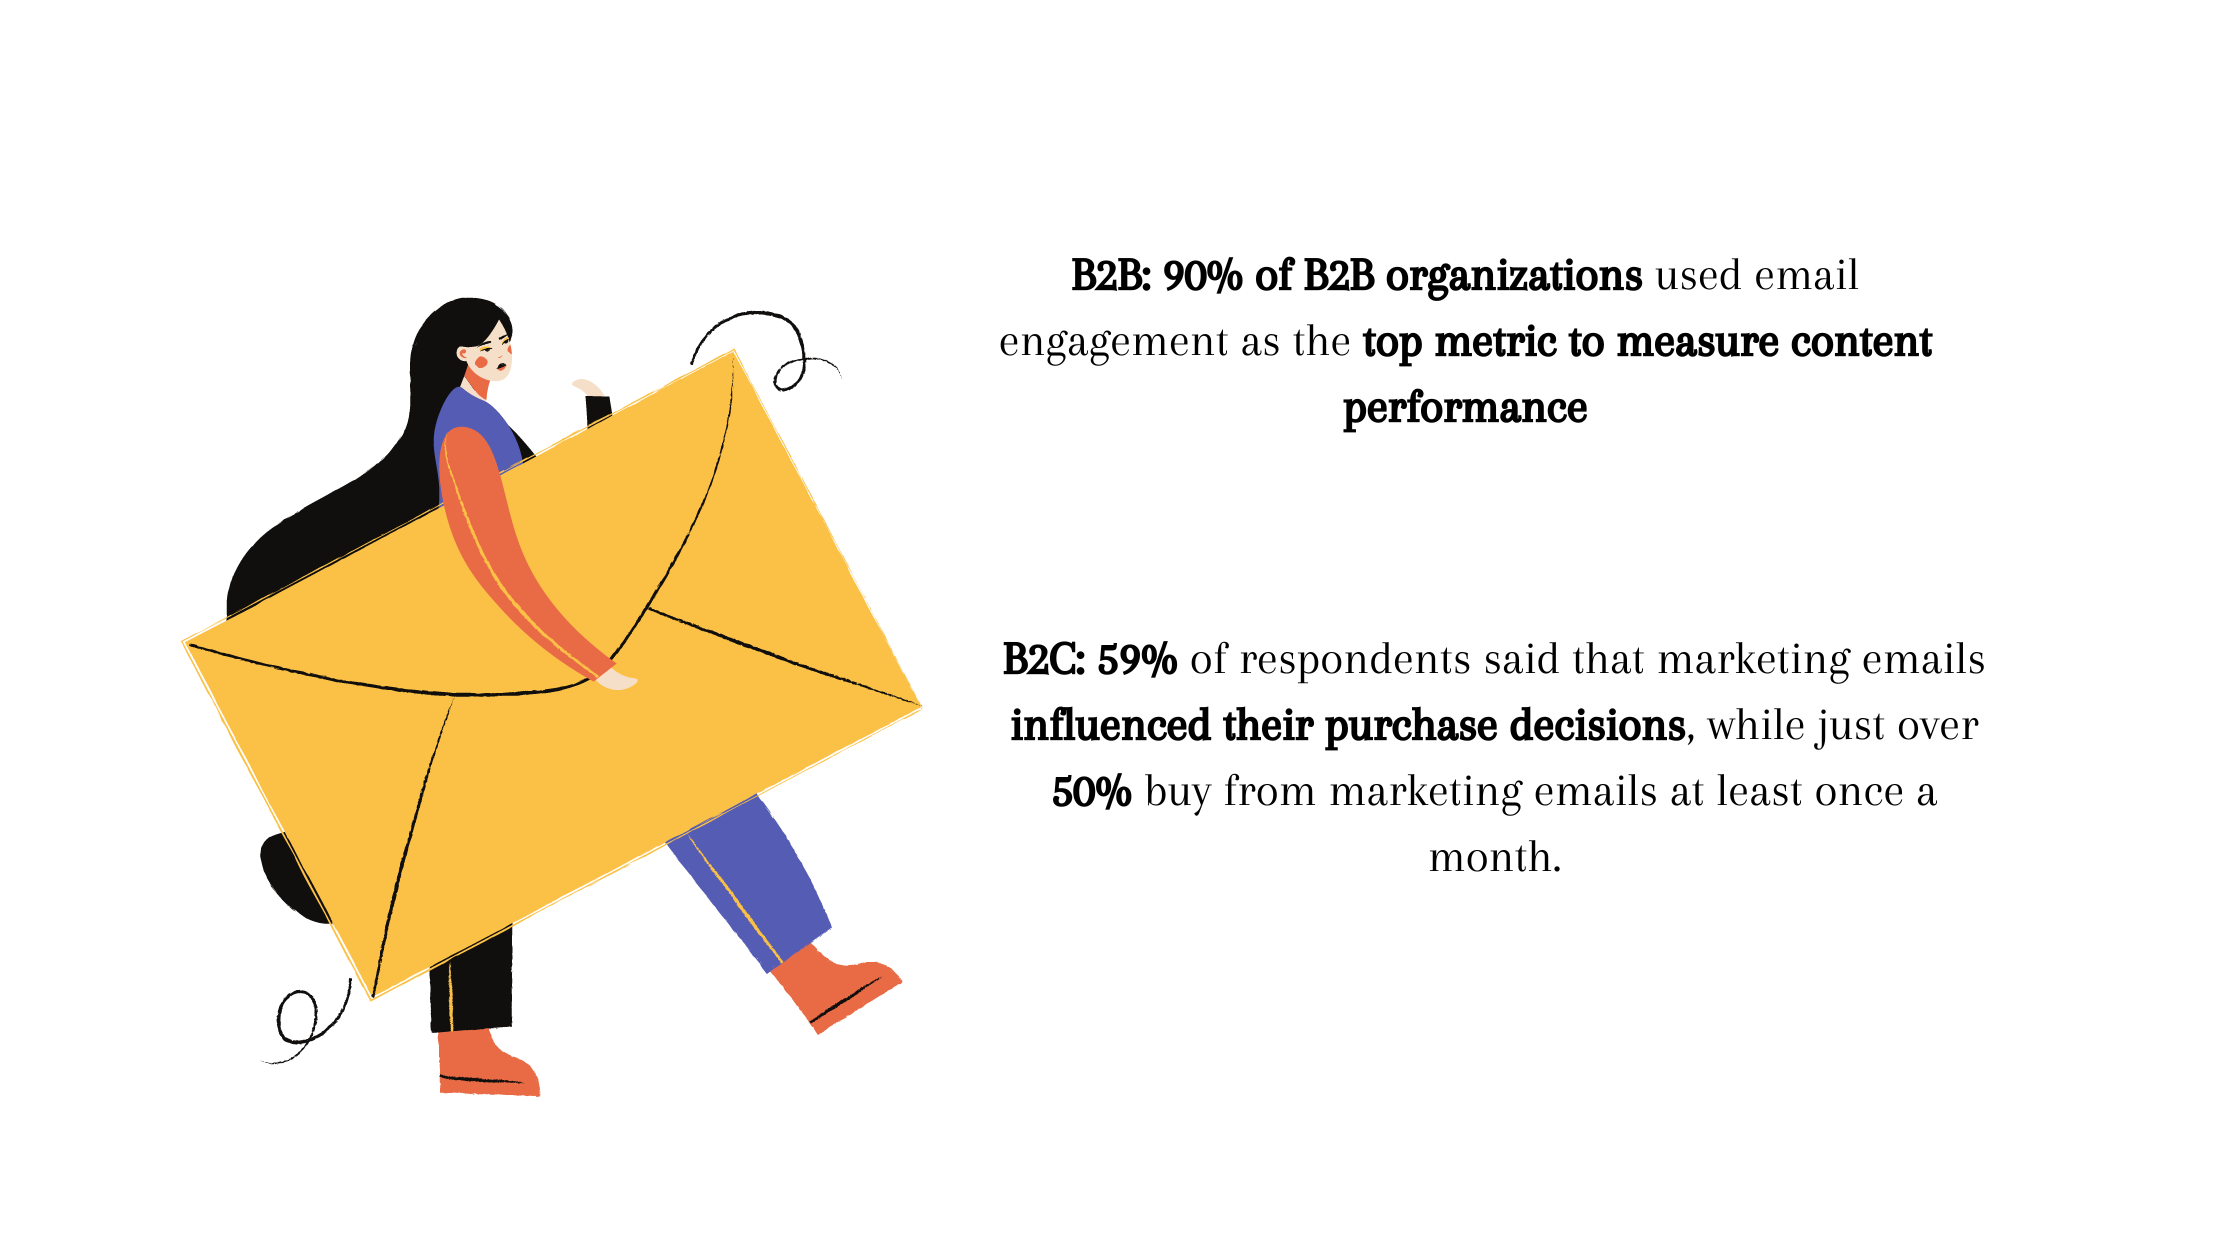 Email engagement rates